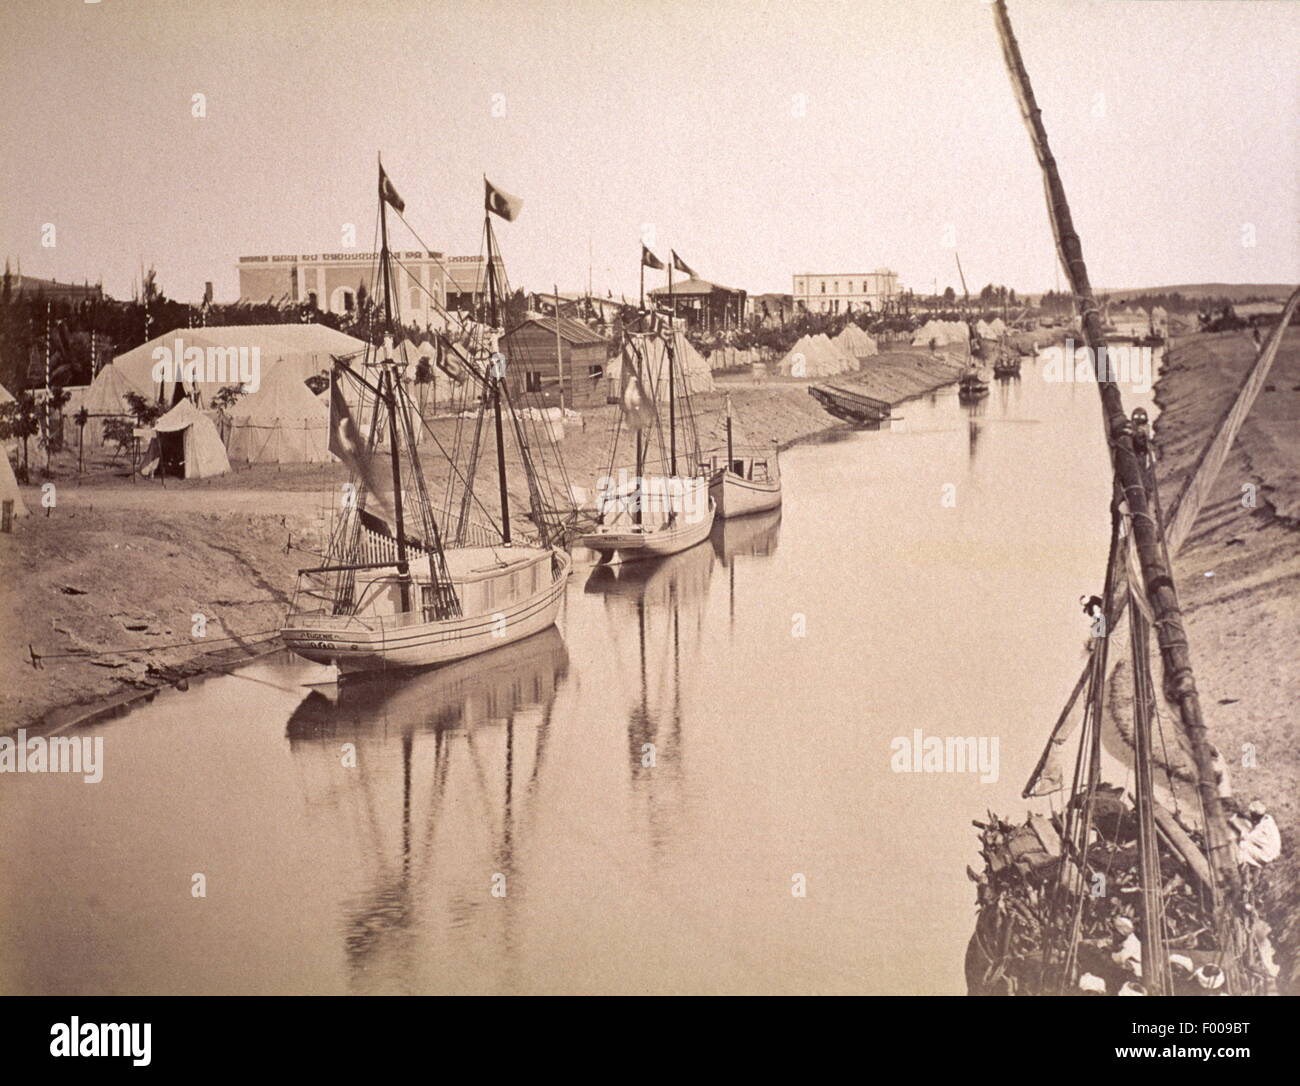 Ismailia, Egypt-1880s-A feeder canal to the Suez Canal in Ismailia.  Ismailia was established in 1863 to serve as a base camp for the construction of the Suez Canal.   photograph by Arnoux Stock Photo